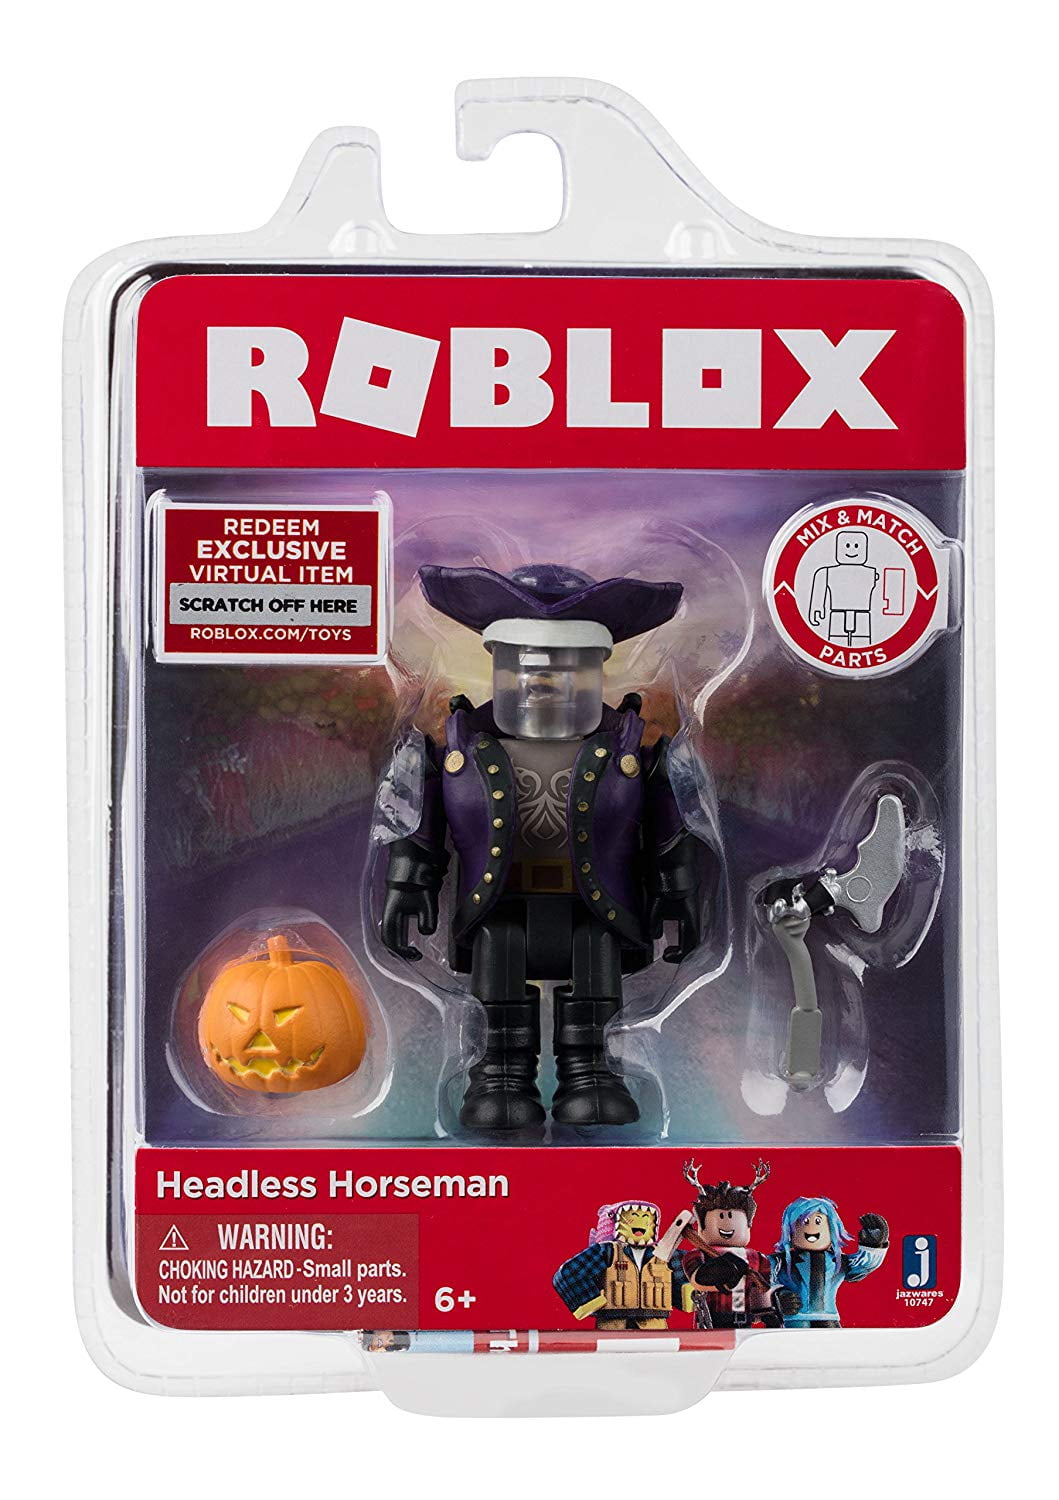 Headless Horseman Figure With Exclusive Virtual Item Game Code Roblox Headless Horseman Figure Packwalmartes With One Figure Accessories And Collector S Checklist By Roblox Walmart Com Walmart Com - headless head roblox rhs 2